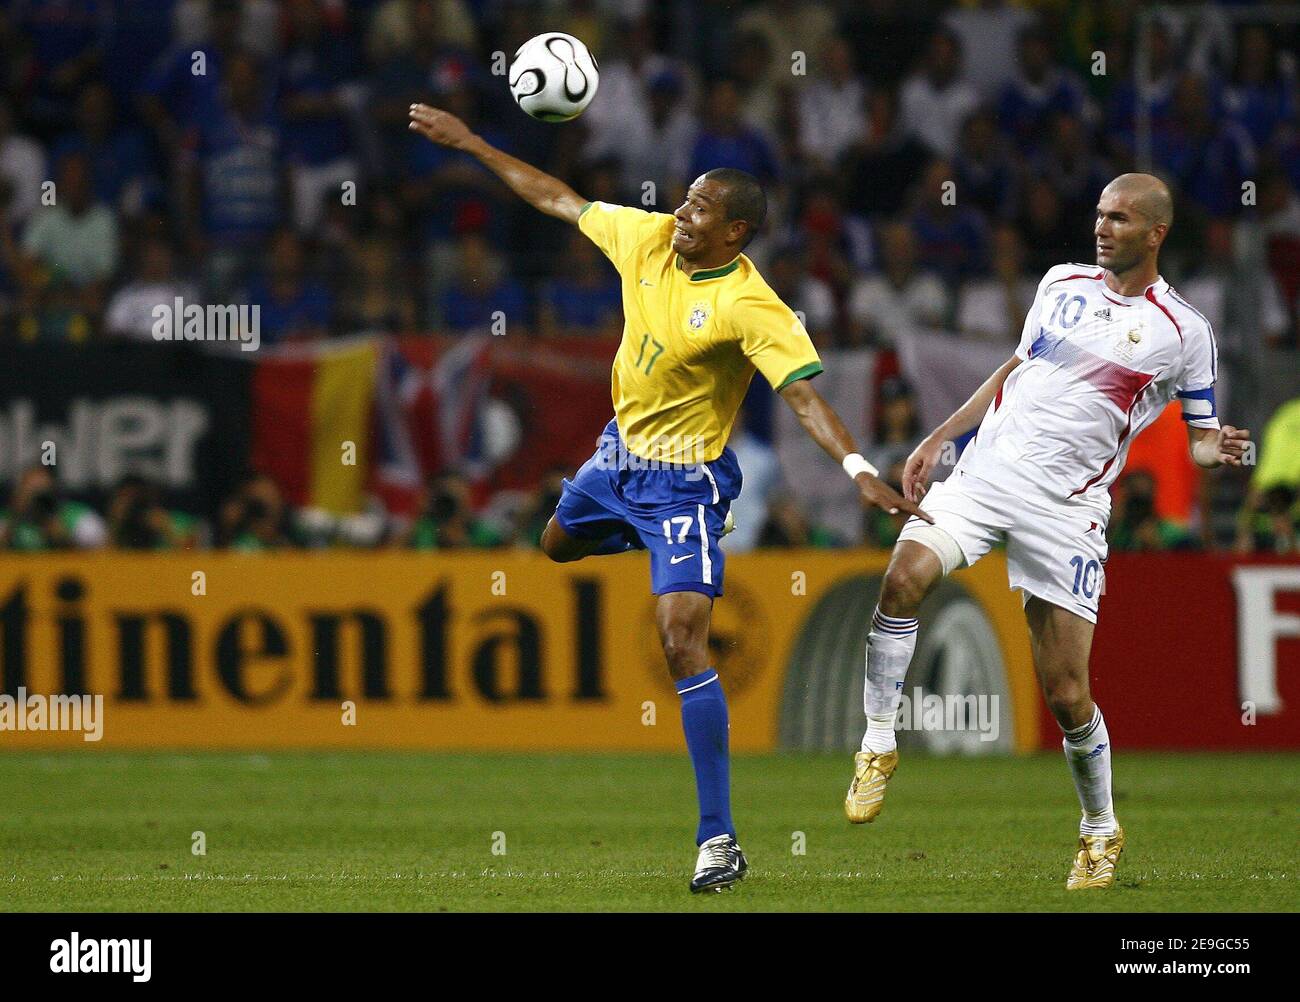 France's Zinedine Zidane and Brazil's Silva Gilberto battle for the ball during the World Cup 2006, quater-final, Brazil vs France at the Commerzbank-Arena stadium in Frankfurt, Germany on July 1, 2006. France won 1-0 and advances to World Cup semifinals. Photo by Christian Liewig/ABACAPRESS.COM Stock Photo